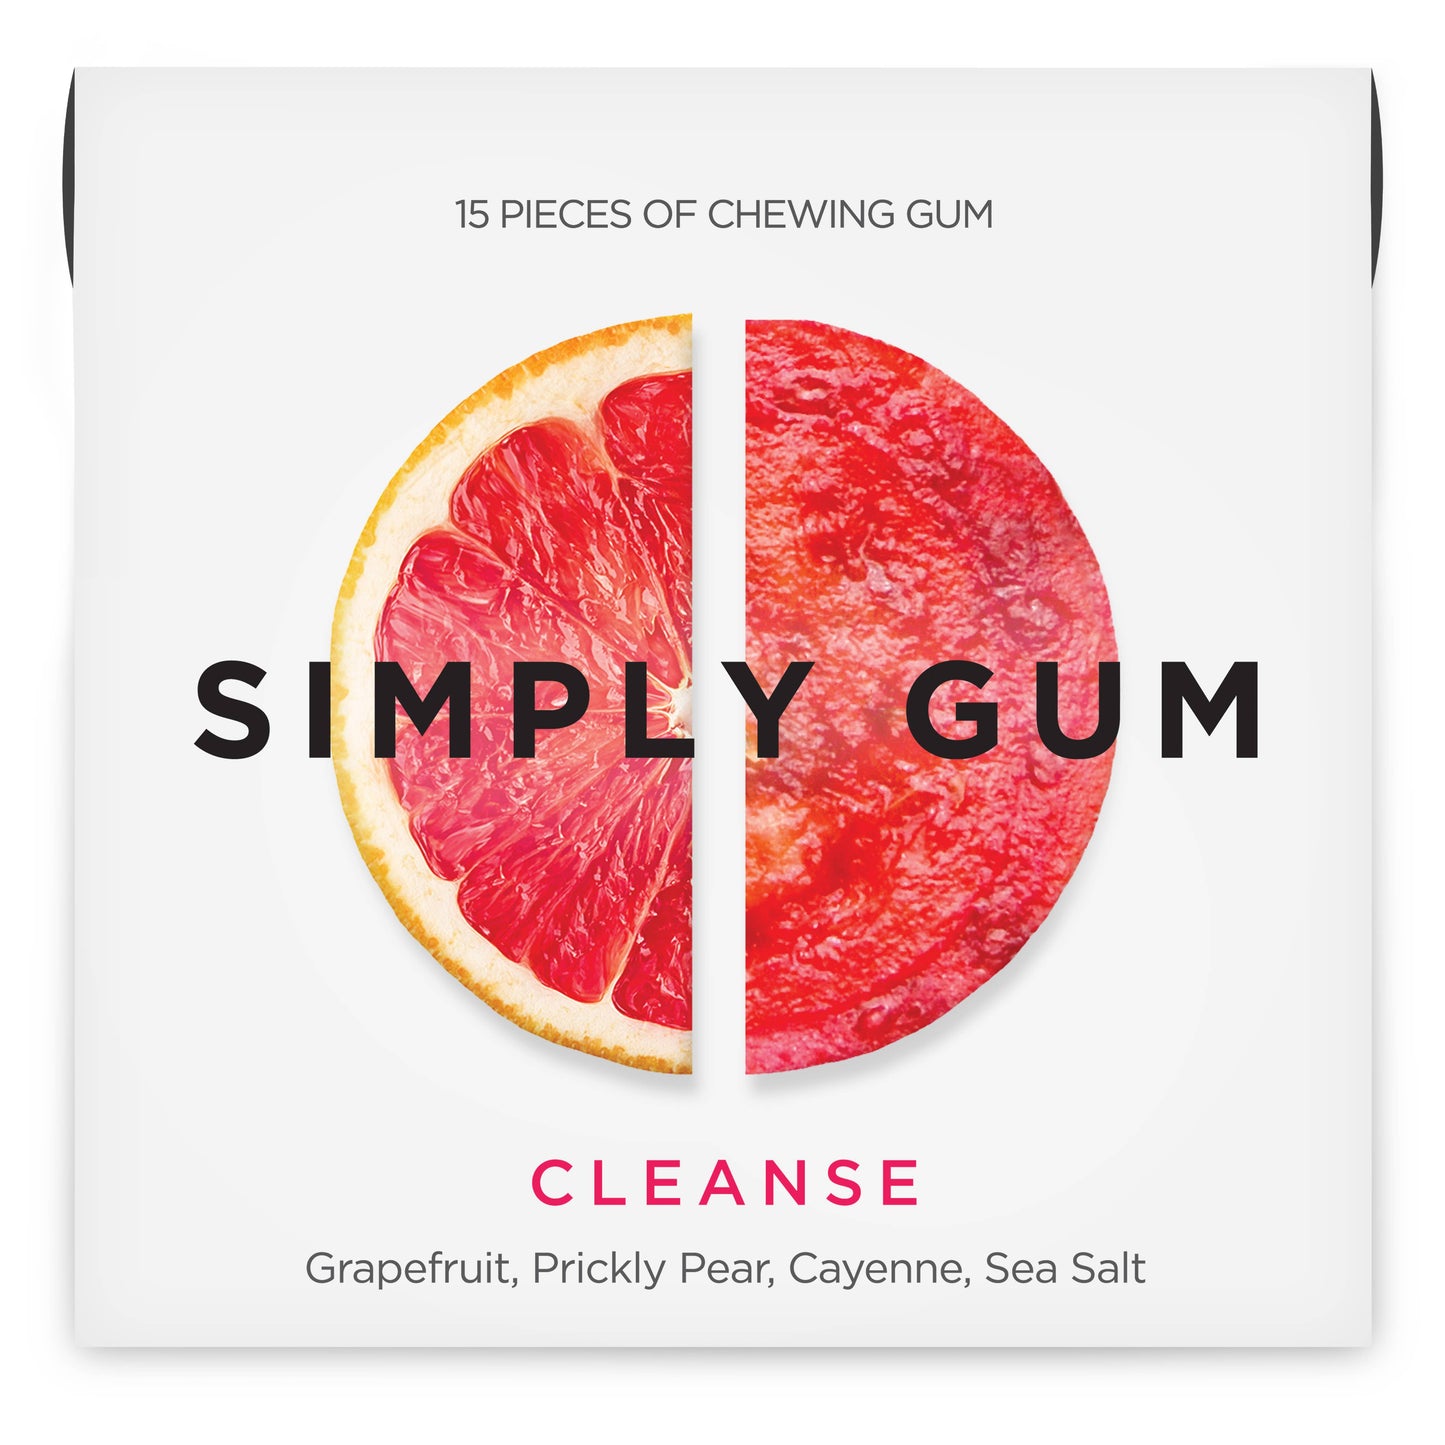 Simply Gum Cleanse Natural Chewing Gum